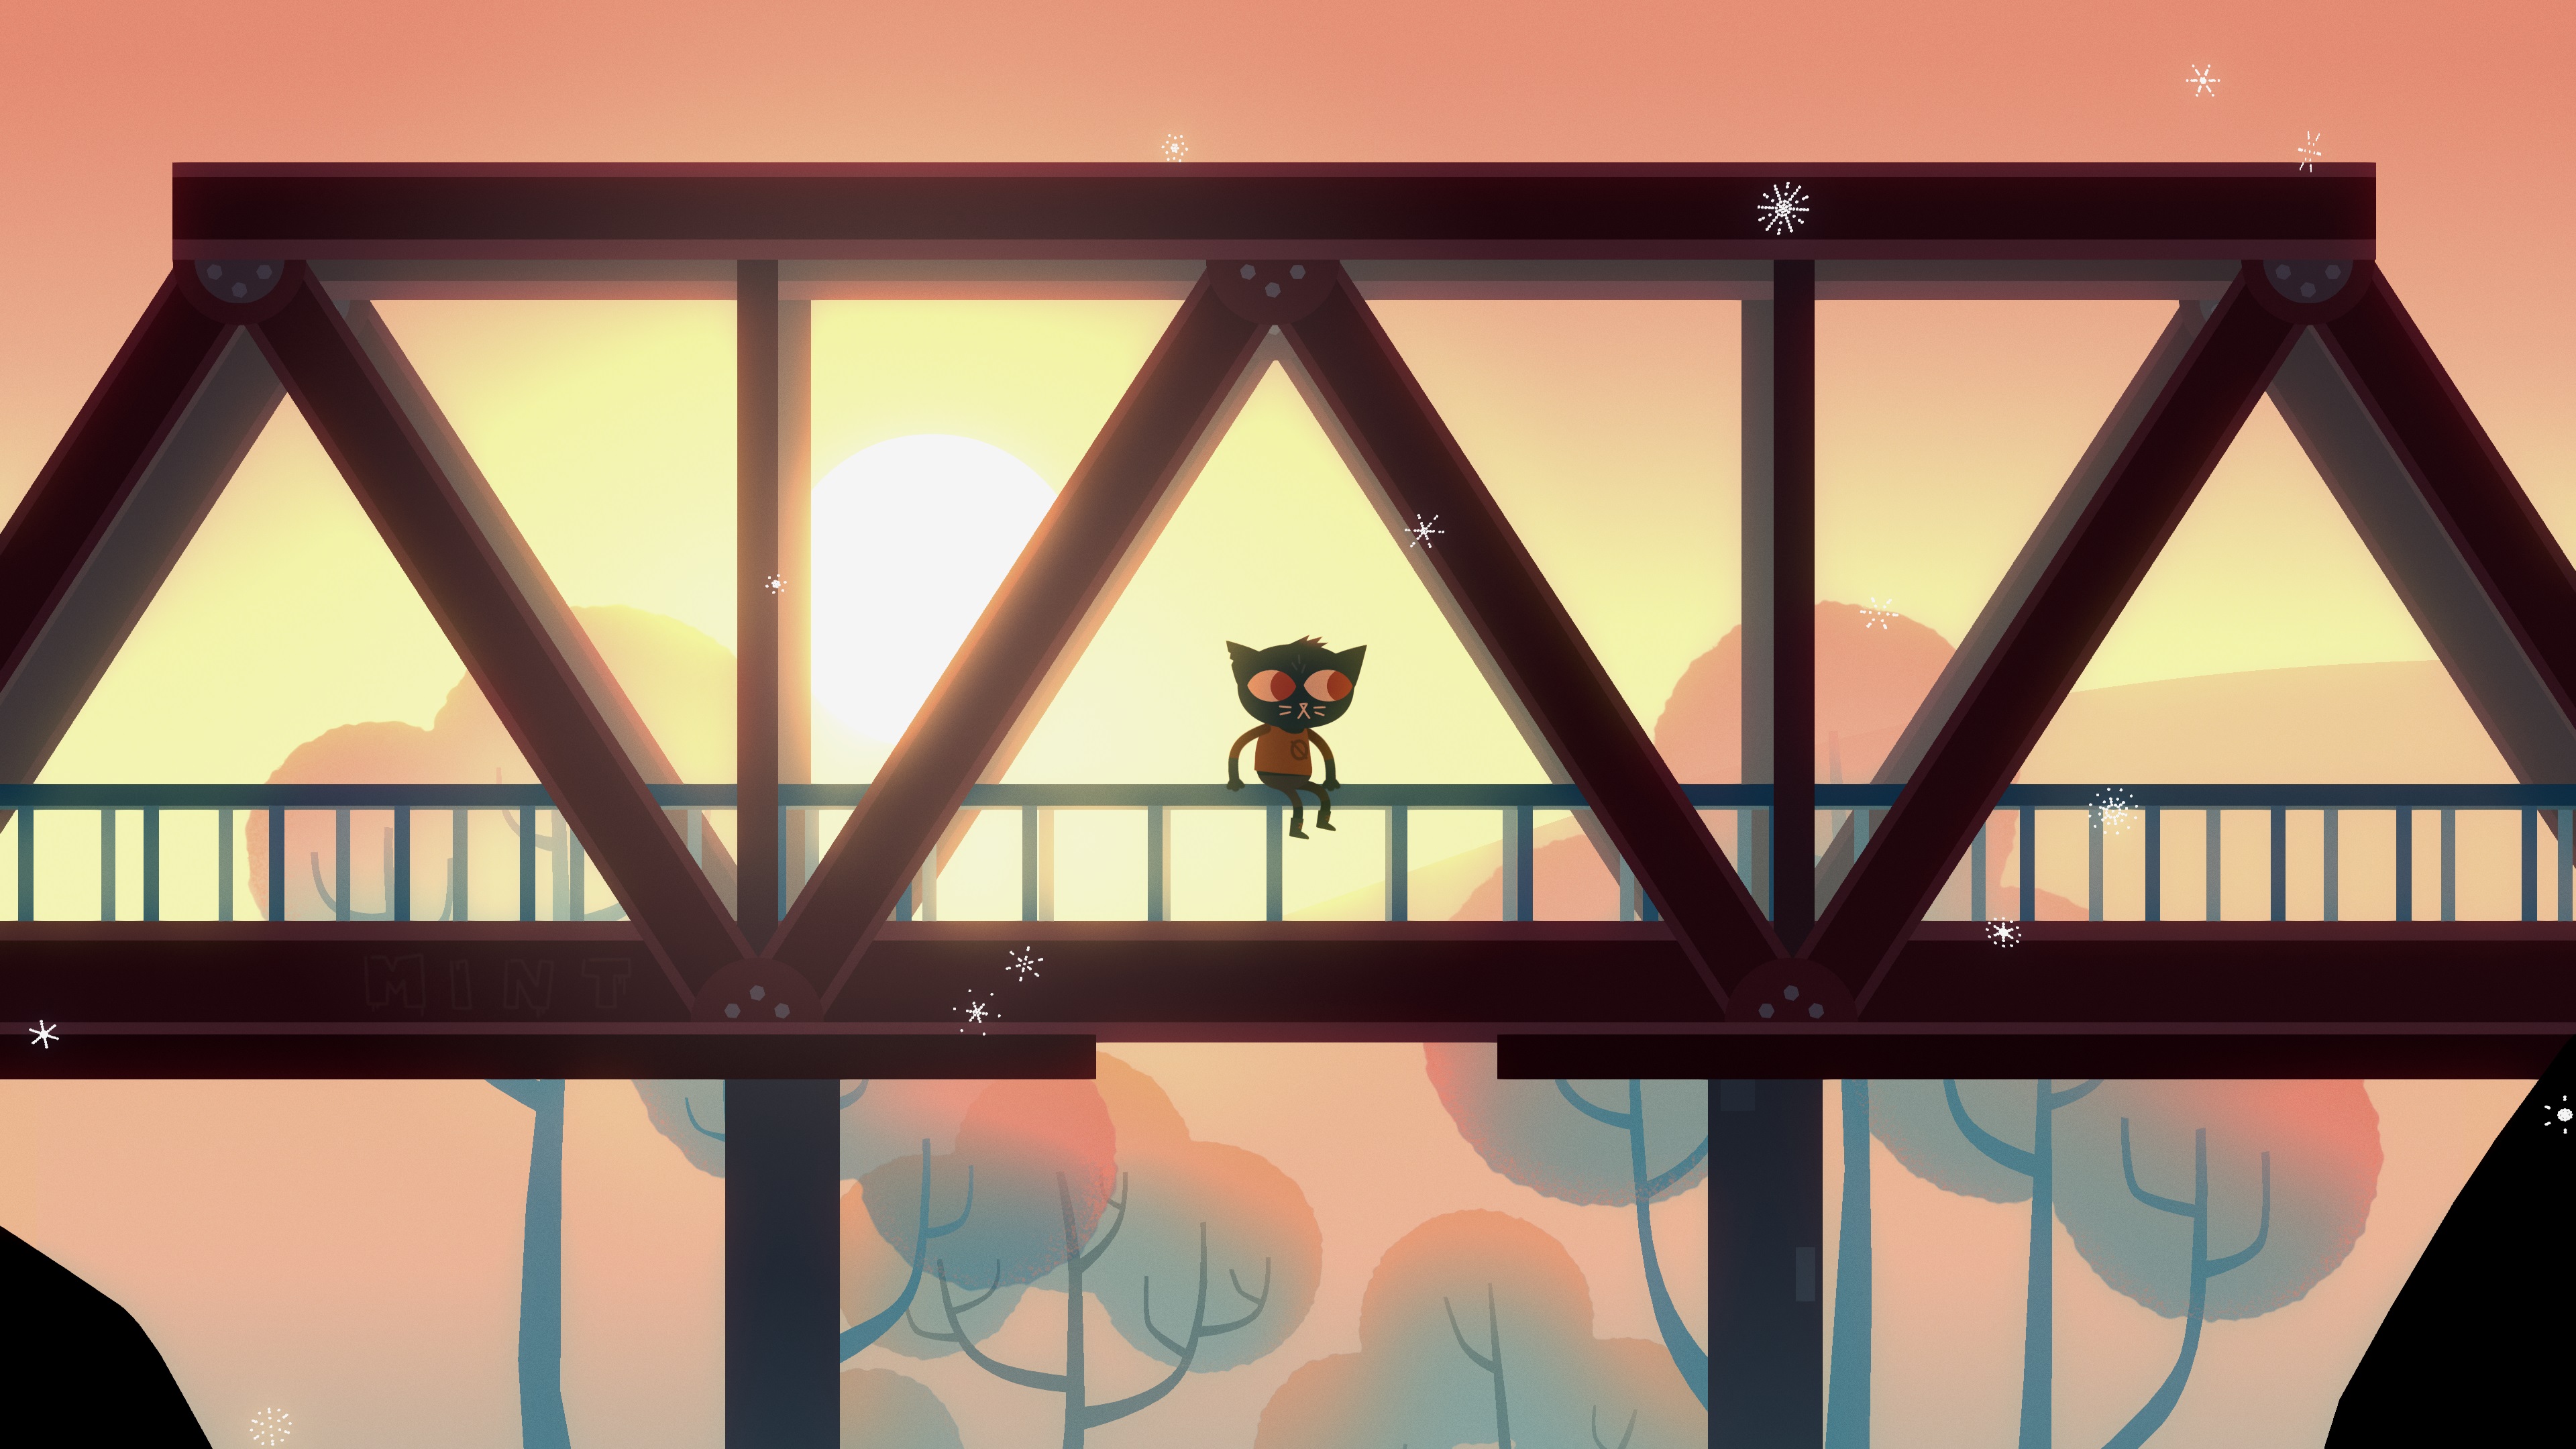 Night in the Woods is one of the best indie games I've ever played